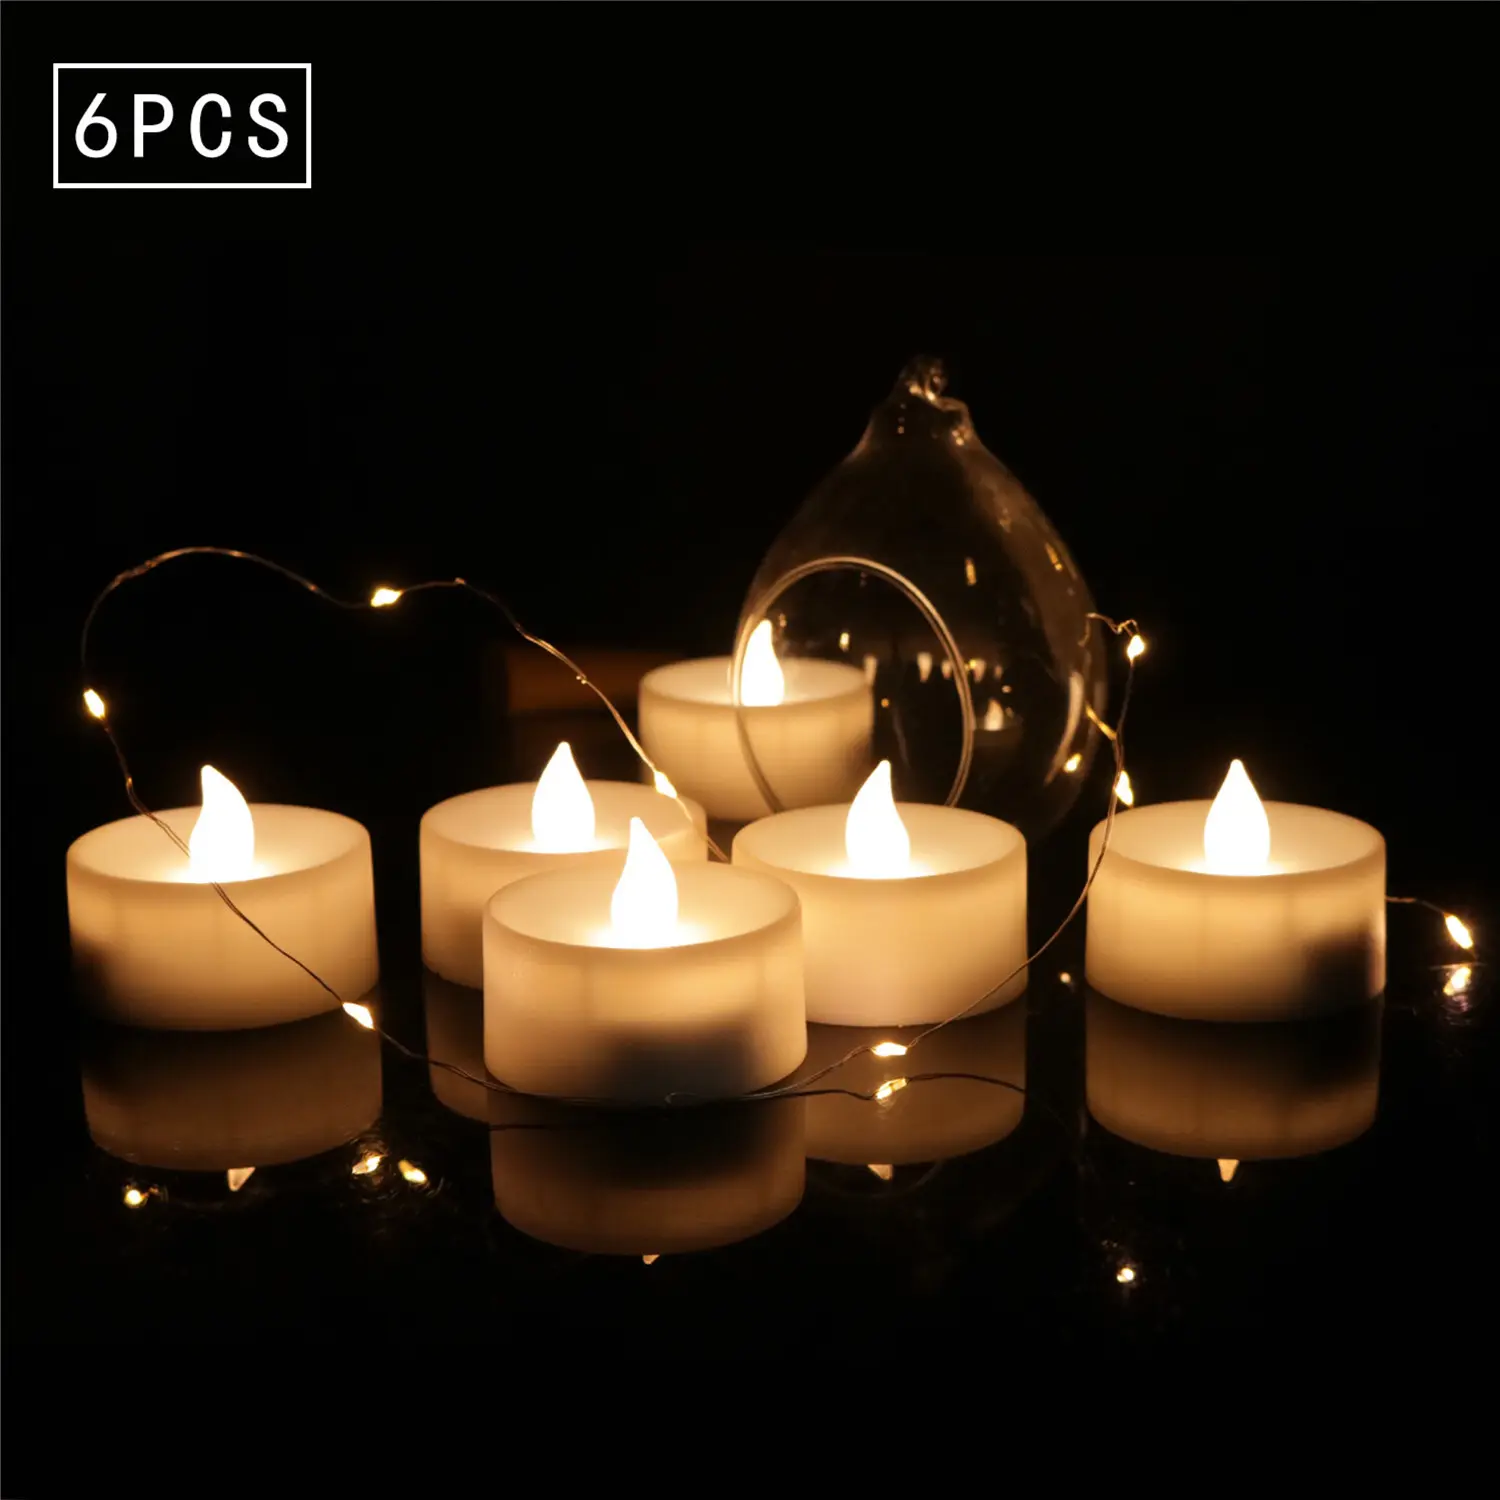 Hot Sale LED Flickering Flameless Tealight Candles OEM White Candle Tea Lights With Timer For Wedding Birthday Decoration